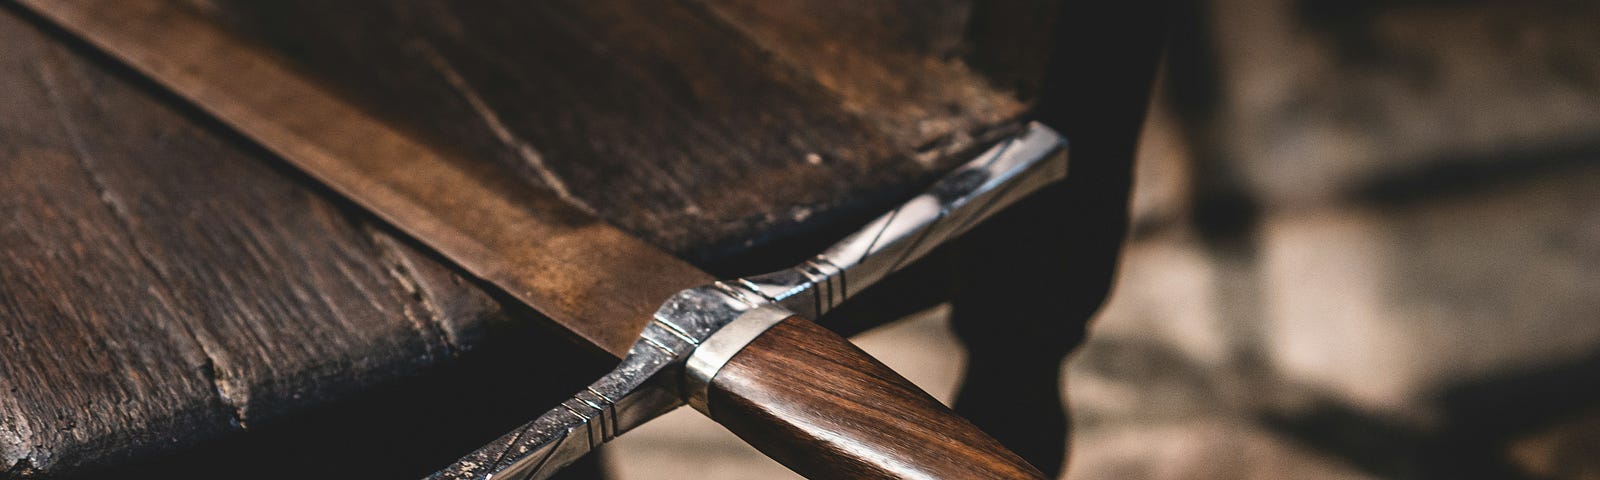 Longsword laying on a wooden table